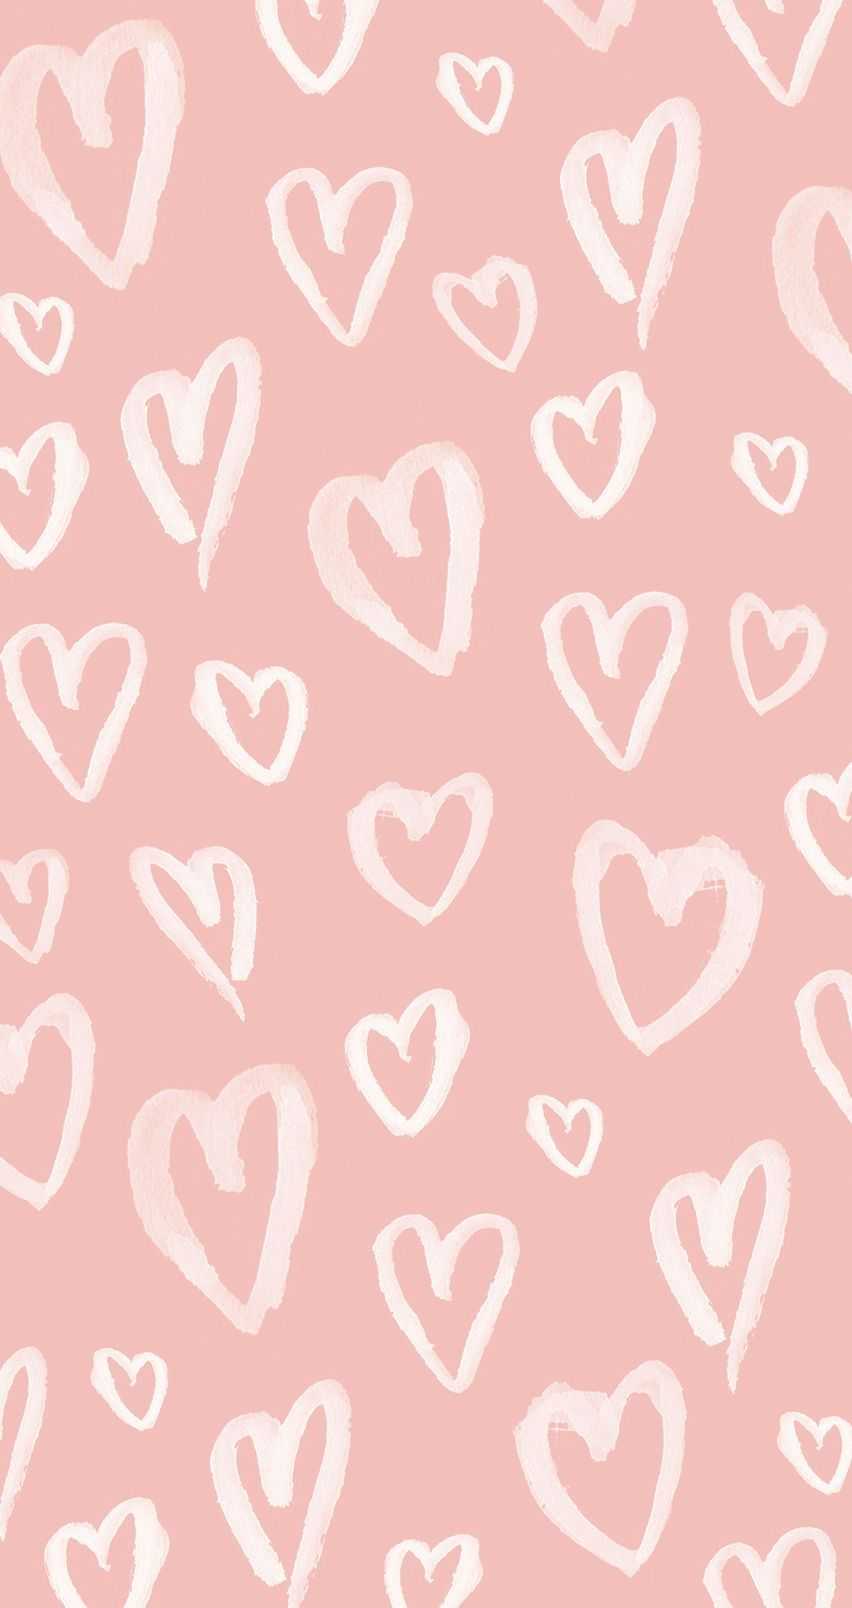 Discover 67+ pink heart wallpaper aesthetic - in.cdgdbentre